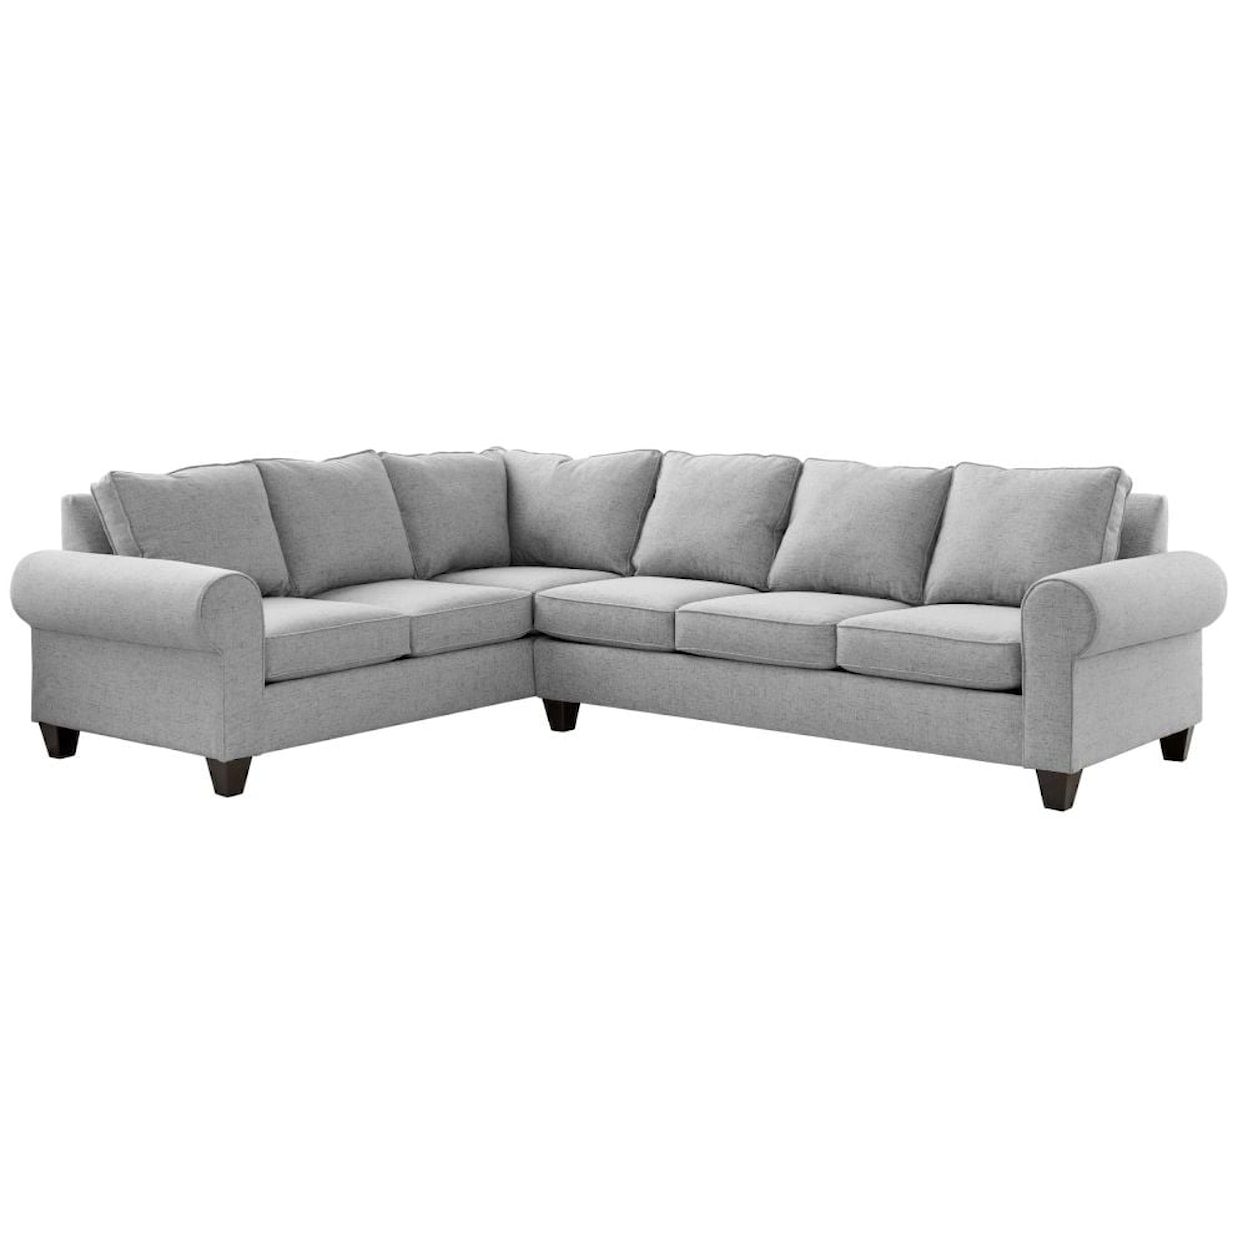 Elements International 705 RHF Sectional Sofa with Rolled Arms